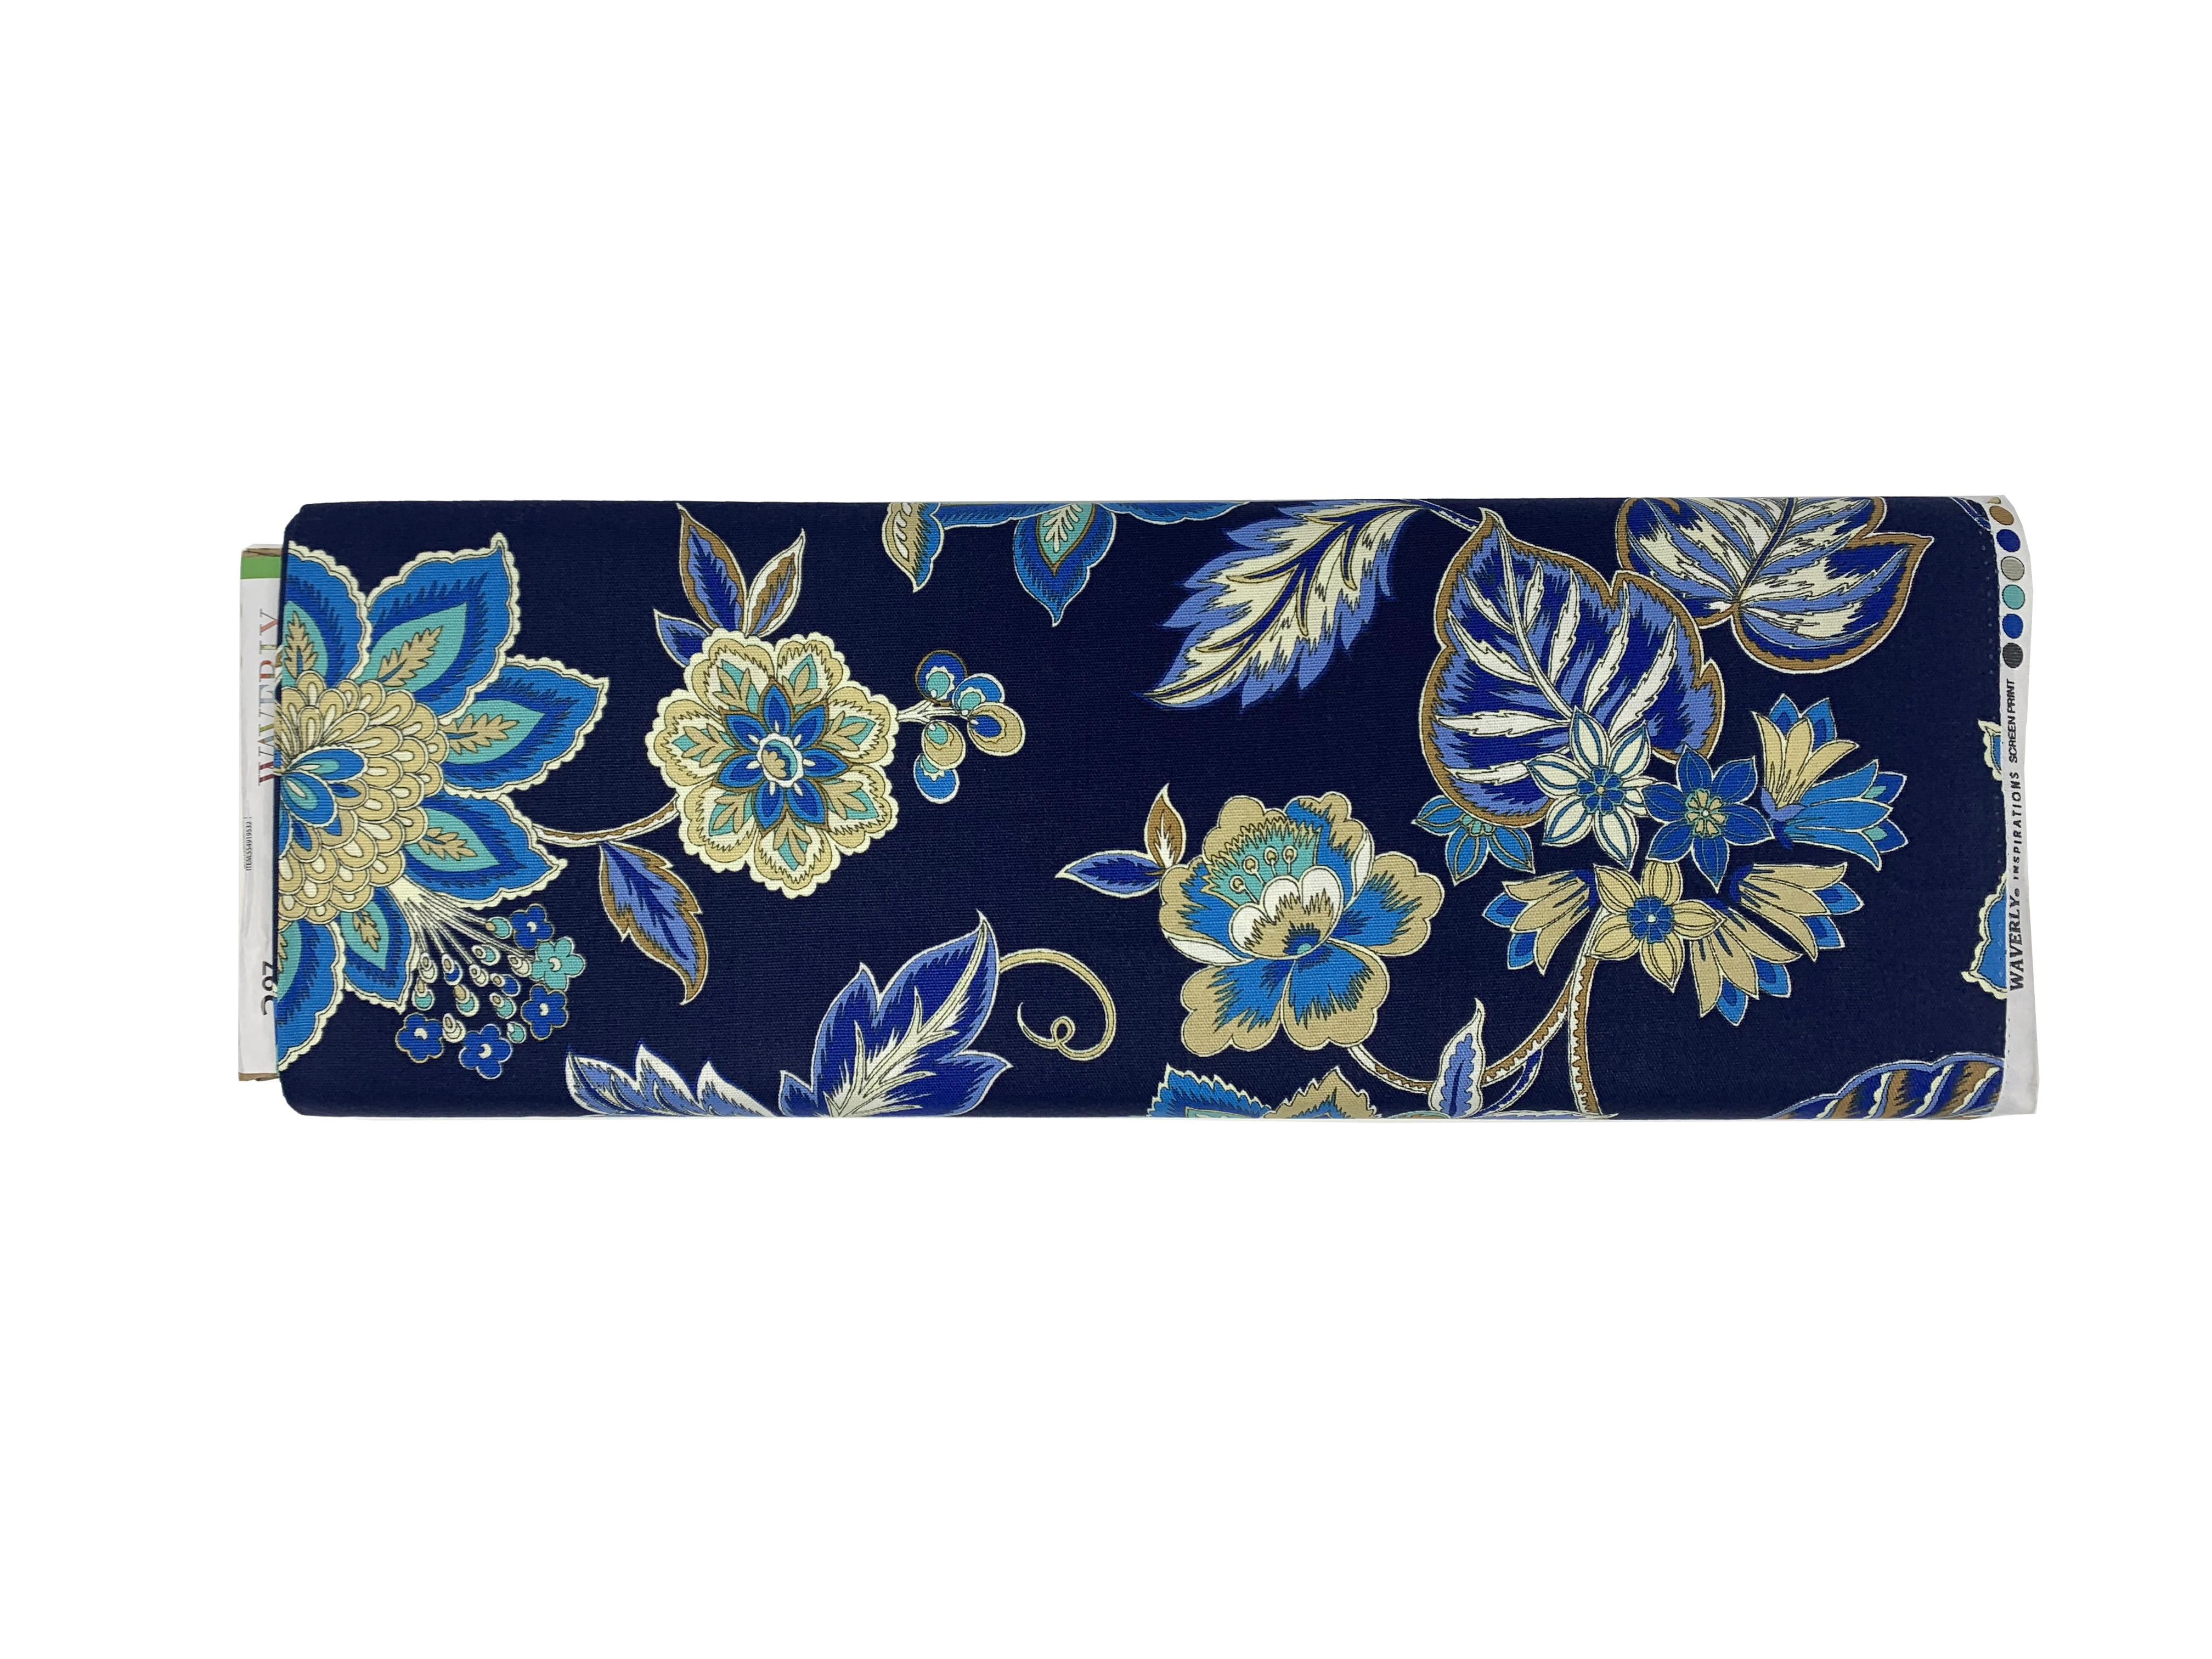 Waverly Inspirations 45" 100% Cotton Printed Sewing & Craft Fabric By the Yard, Floral Blue - image 3 of 3